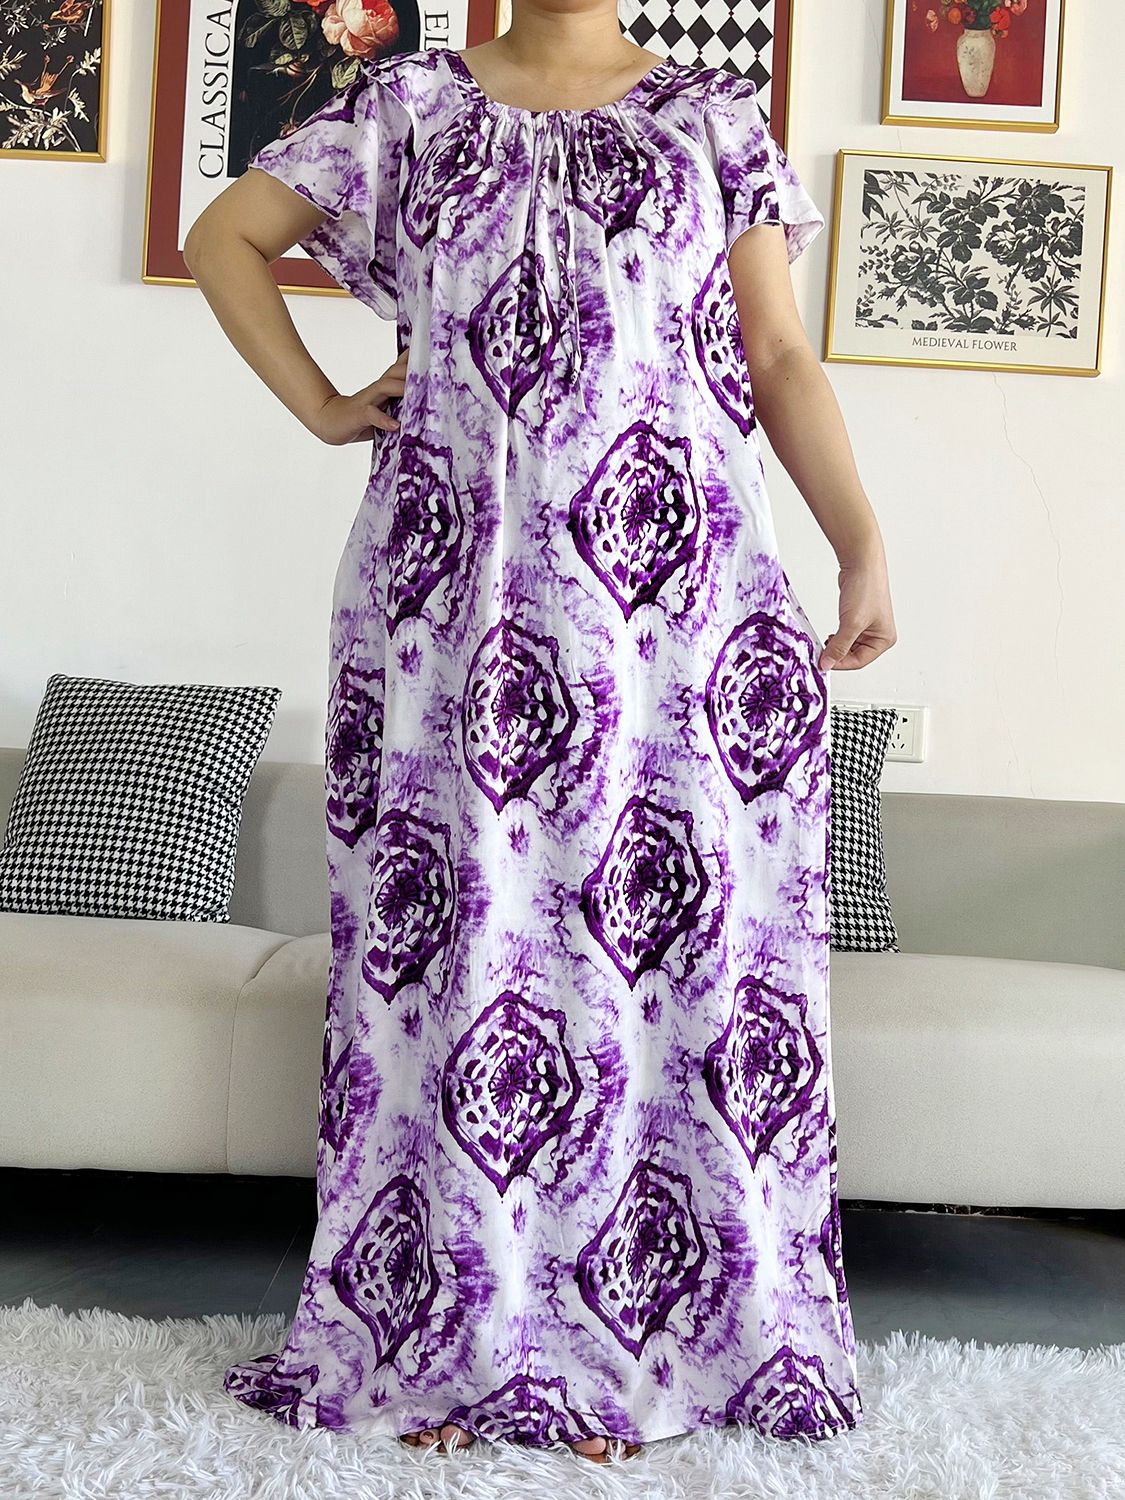 Ethnic Chic: African Inspired Tie-Dye Abaya Dress with Floral Prints and Loose Fit - Perfect for Summer - Flexi Africa